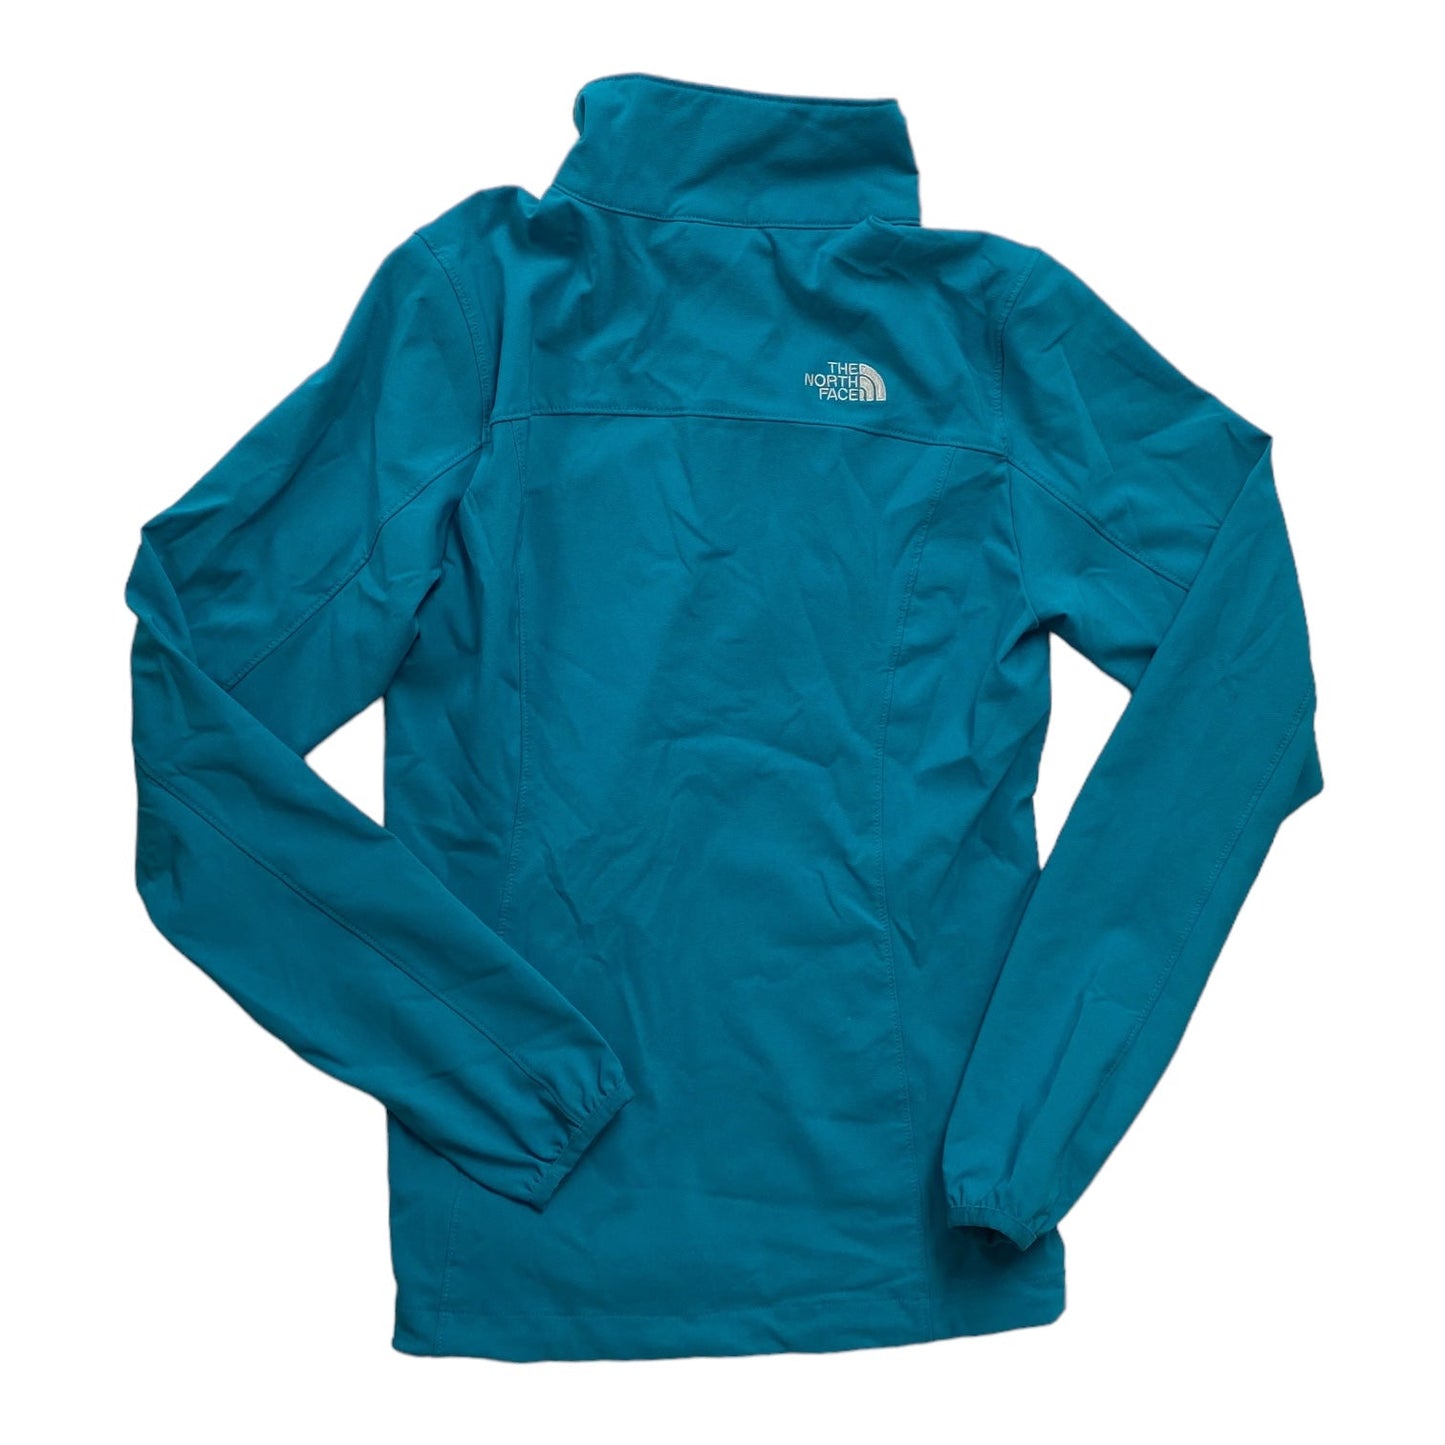 Blue Athletic Top Long Sleeve Collar The North Face, Size Petite   S